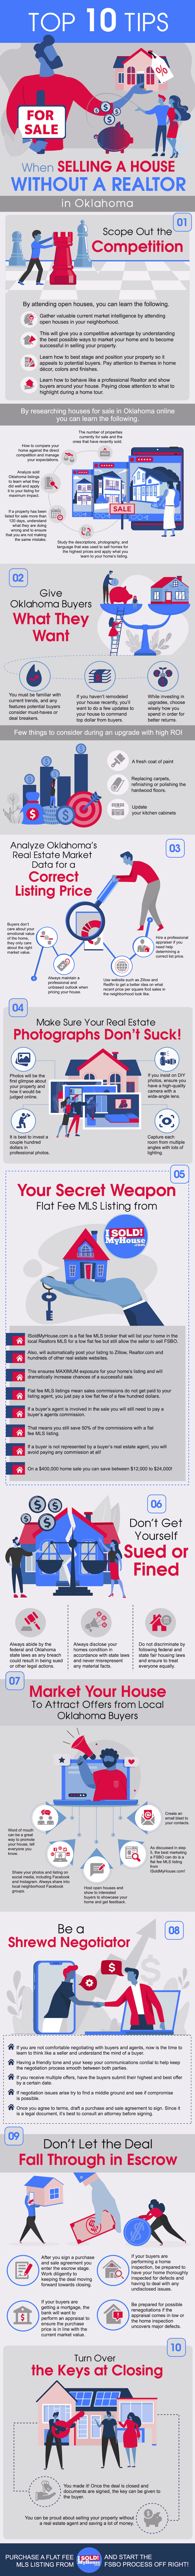 infographic of the 10 steps to sell a house in oklahoma without an agent